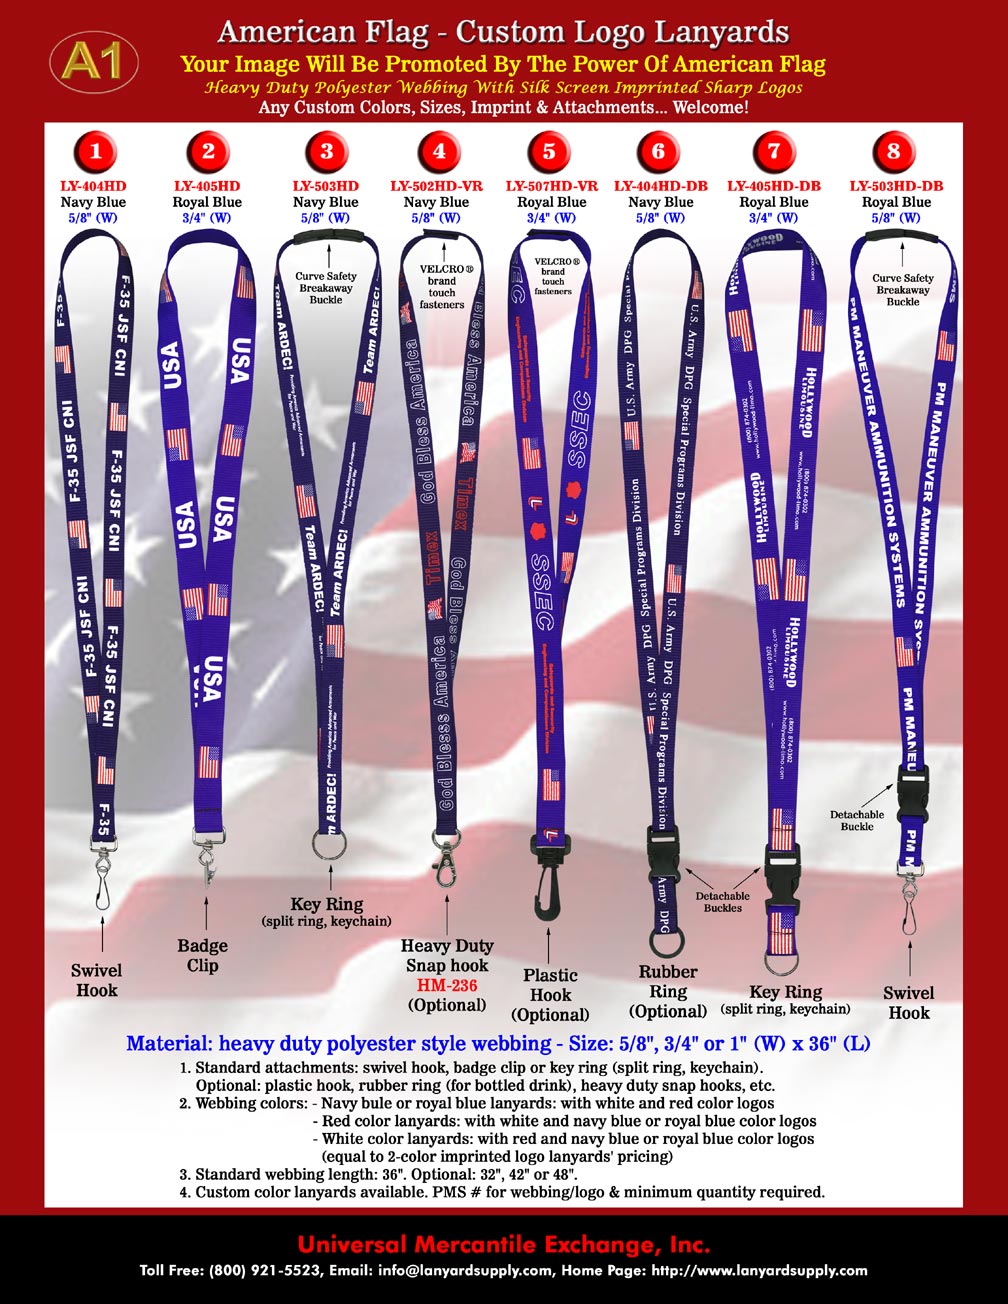 We make promotional lanyards and promotional lanyard supplies to fit your limited budget.